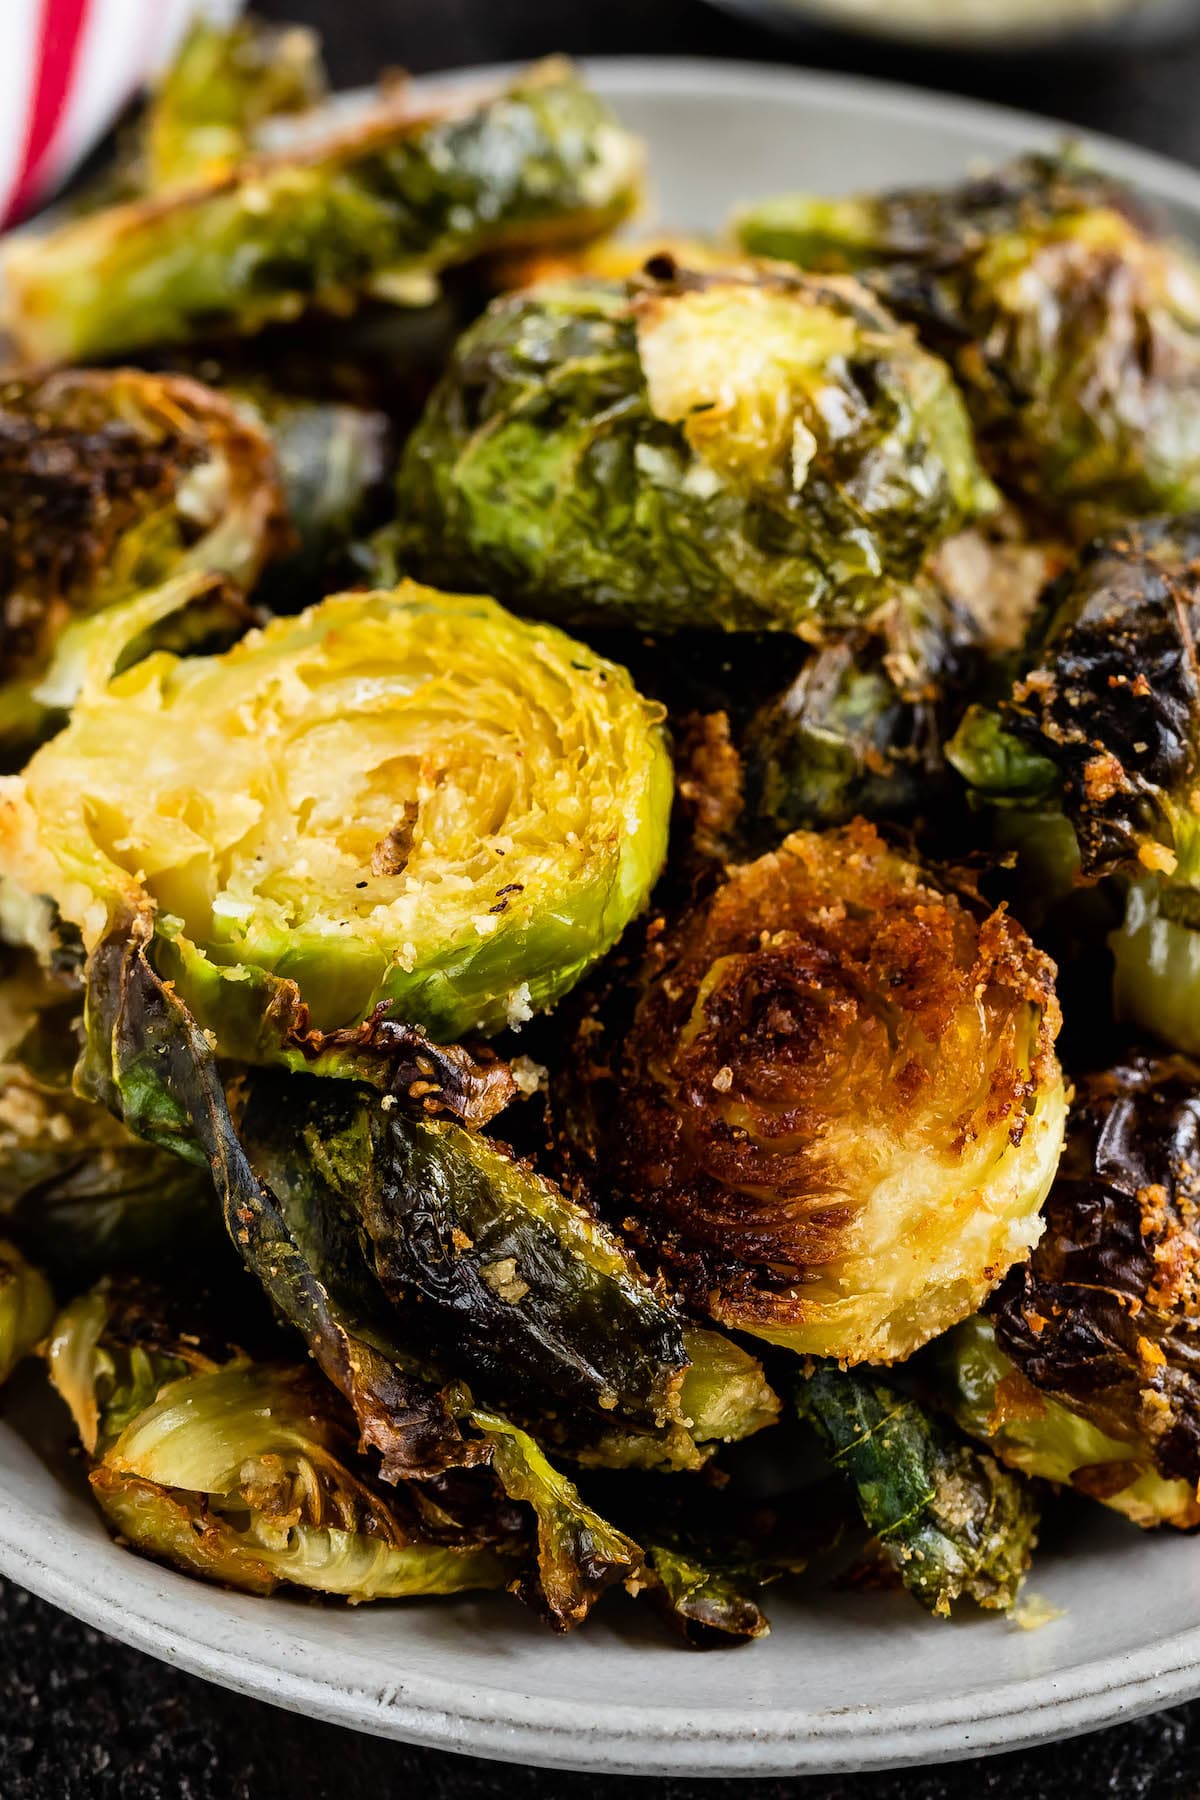 Brussels sprouts sitting on a grey plate